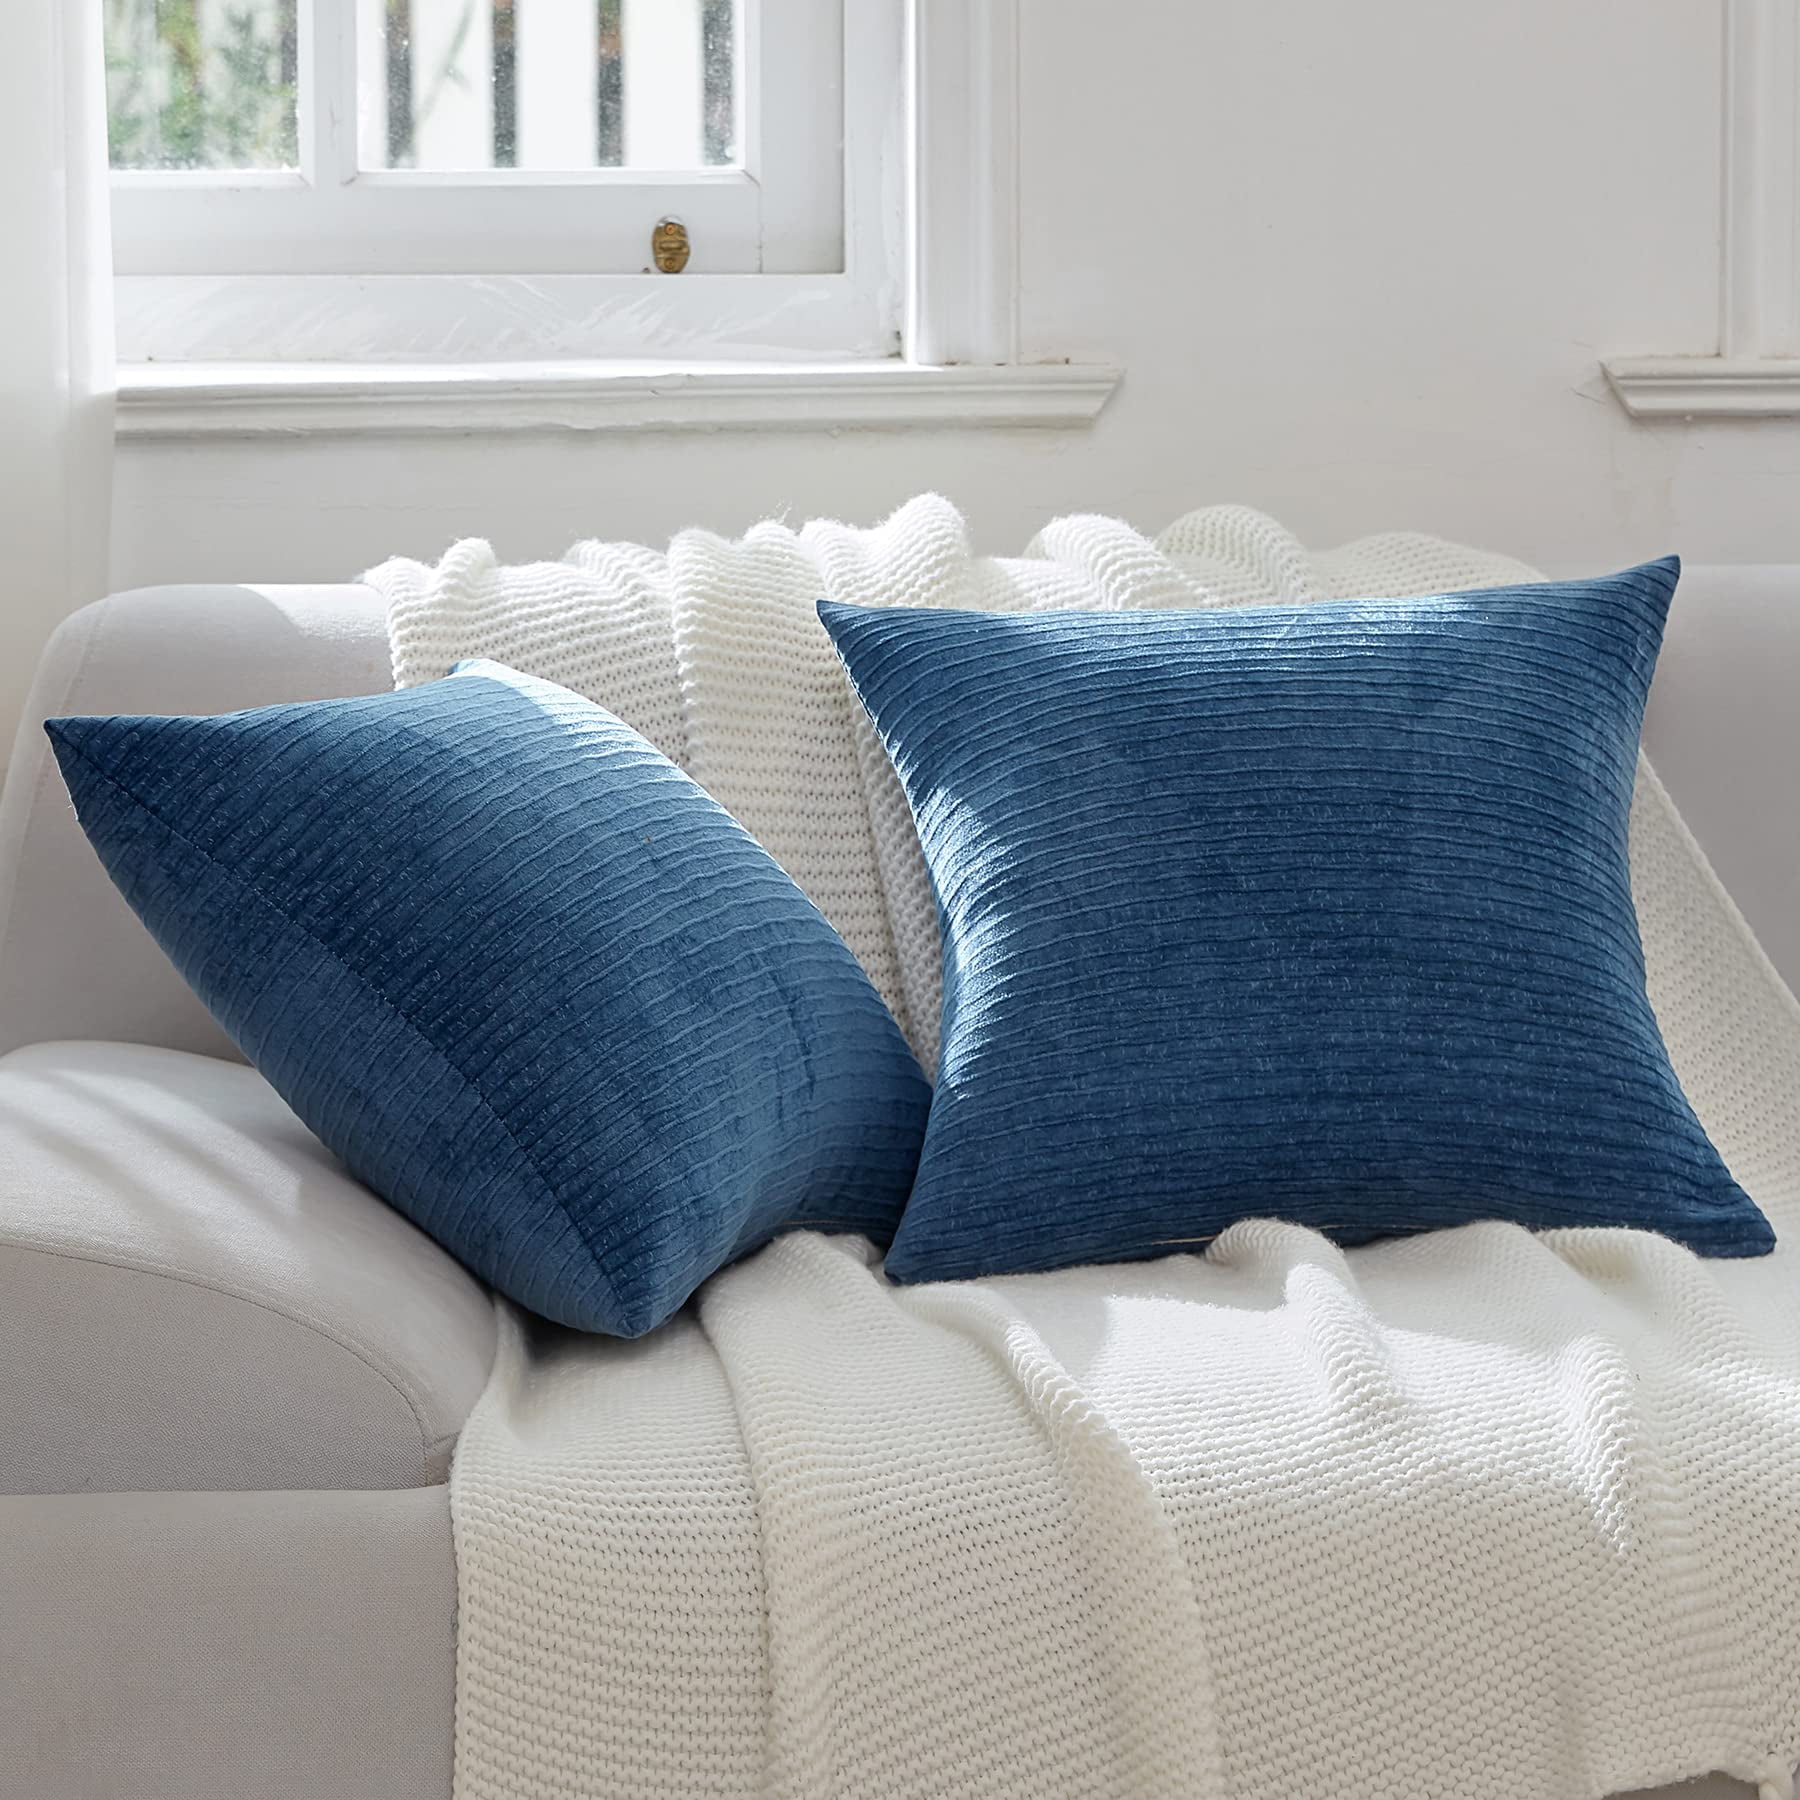 Blue Pillow Covers 18x18 Set Of 2 Square Farmhouse Decorative Throw Pillows  For Couch Sofa Chair Spring, 18x18 Inch, Blue